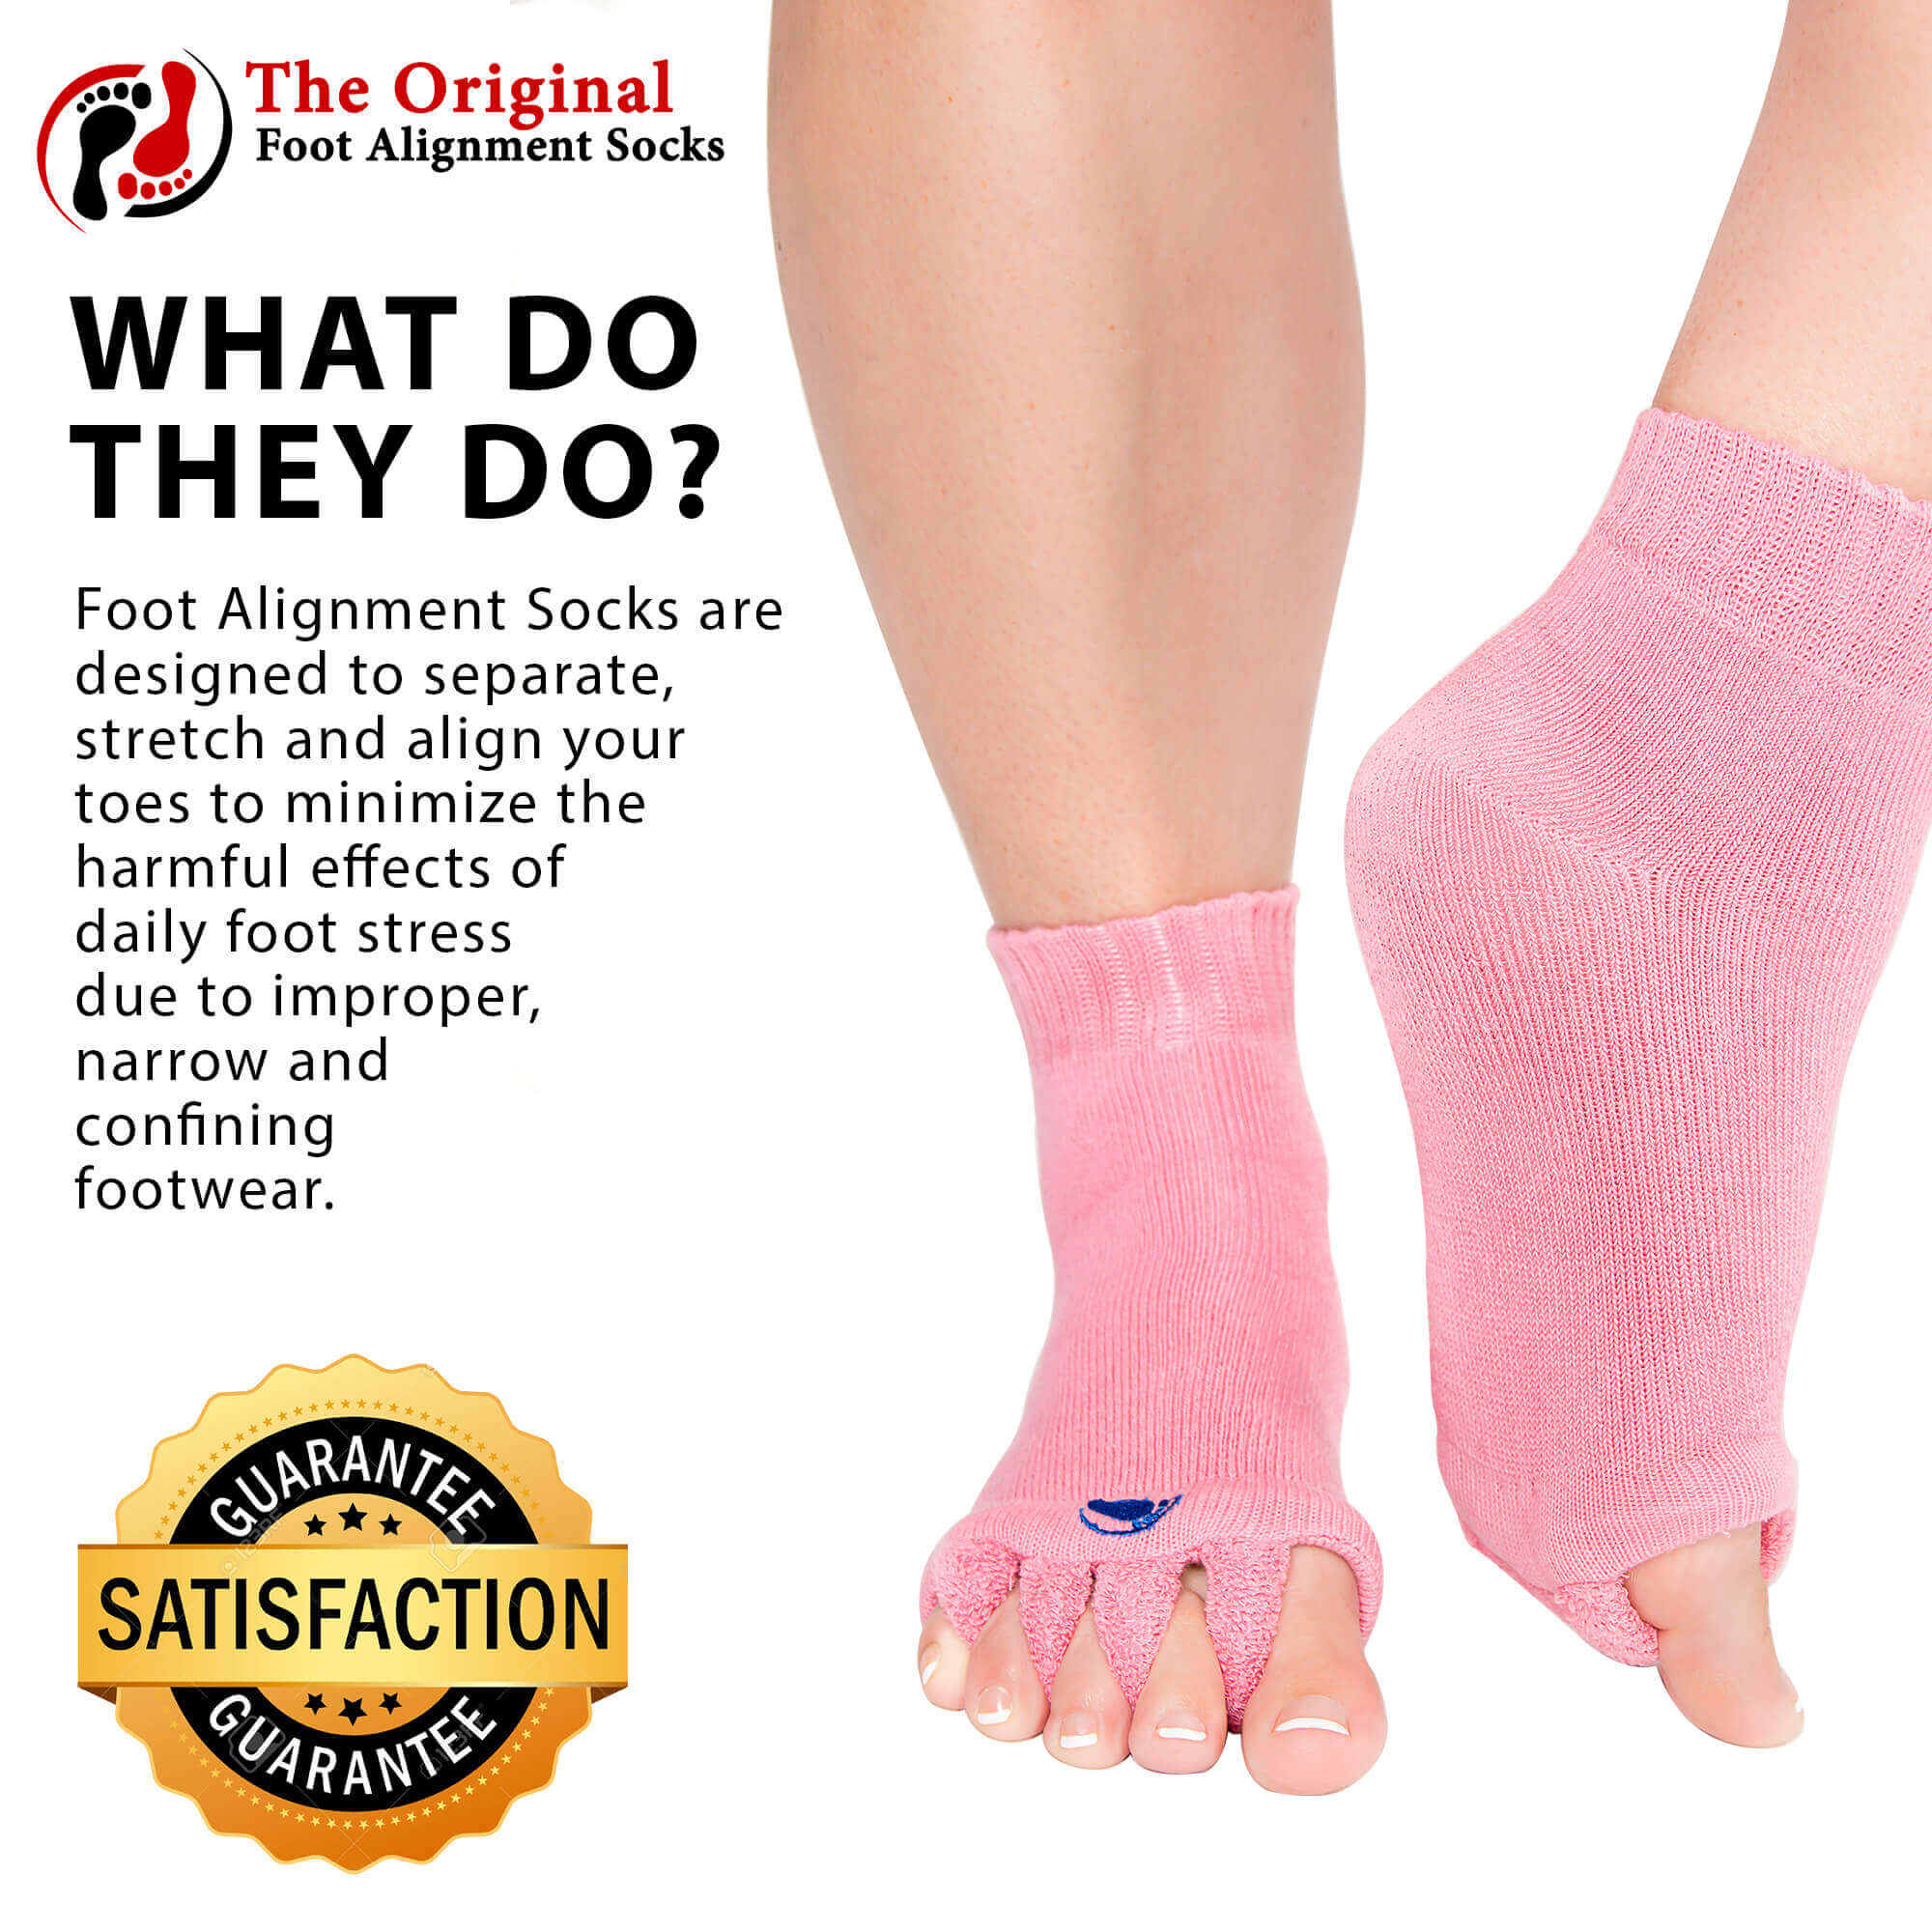  Doctor's Select Diabetic Socks with Grips for Women and Men - 4  Pair, Pink, Green, Red, Purple, Slipper Socks with Grippers for Women, Grippy  Socks for Women